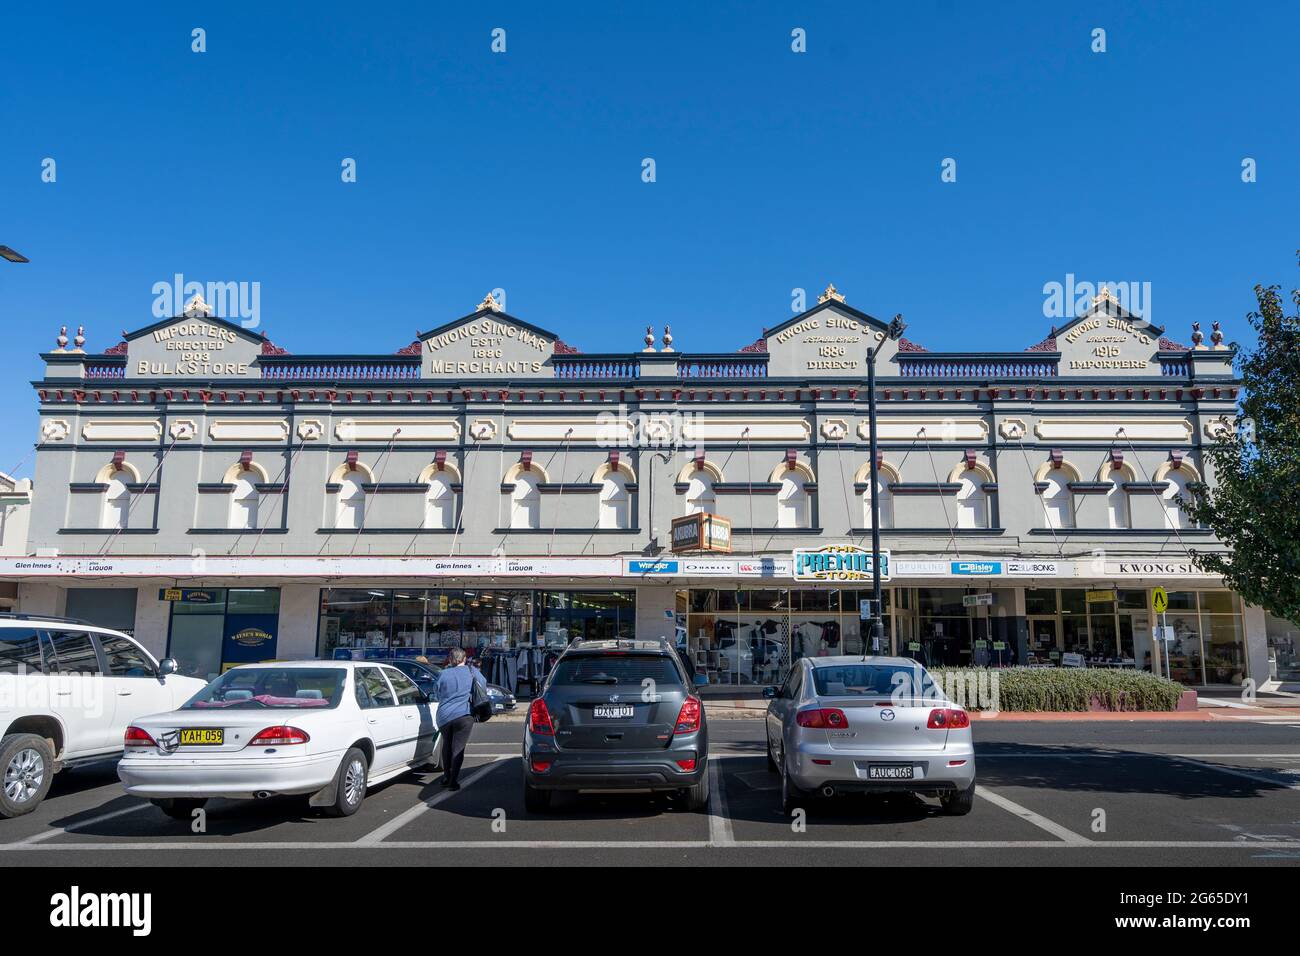 View of the front of the historic Kwong Sing War retail store building in main street of Glen Innes, NSW Australia Stock Photo